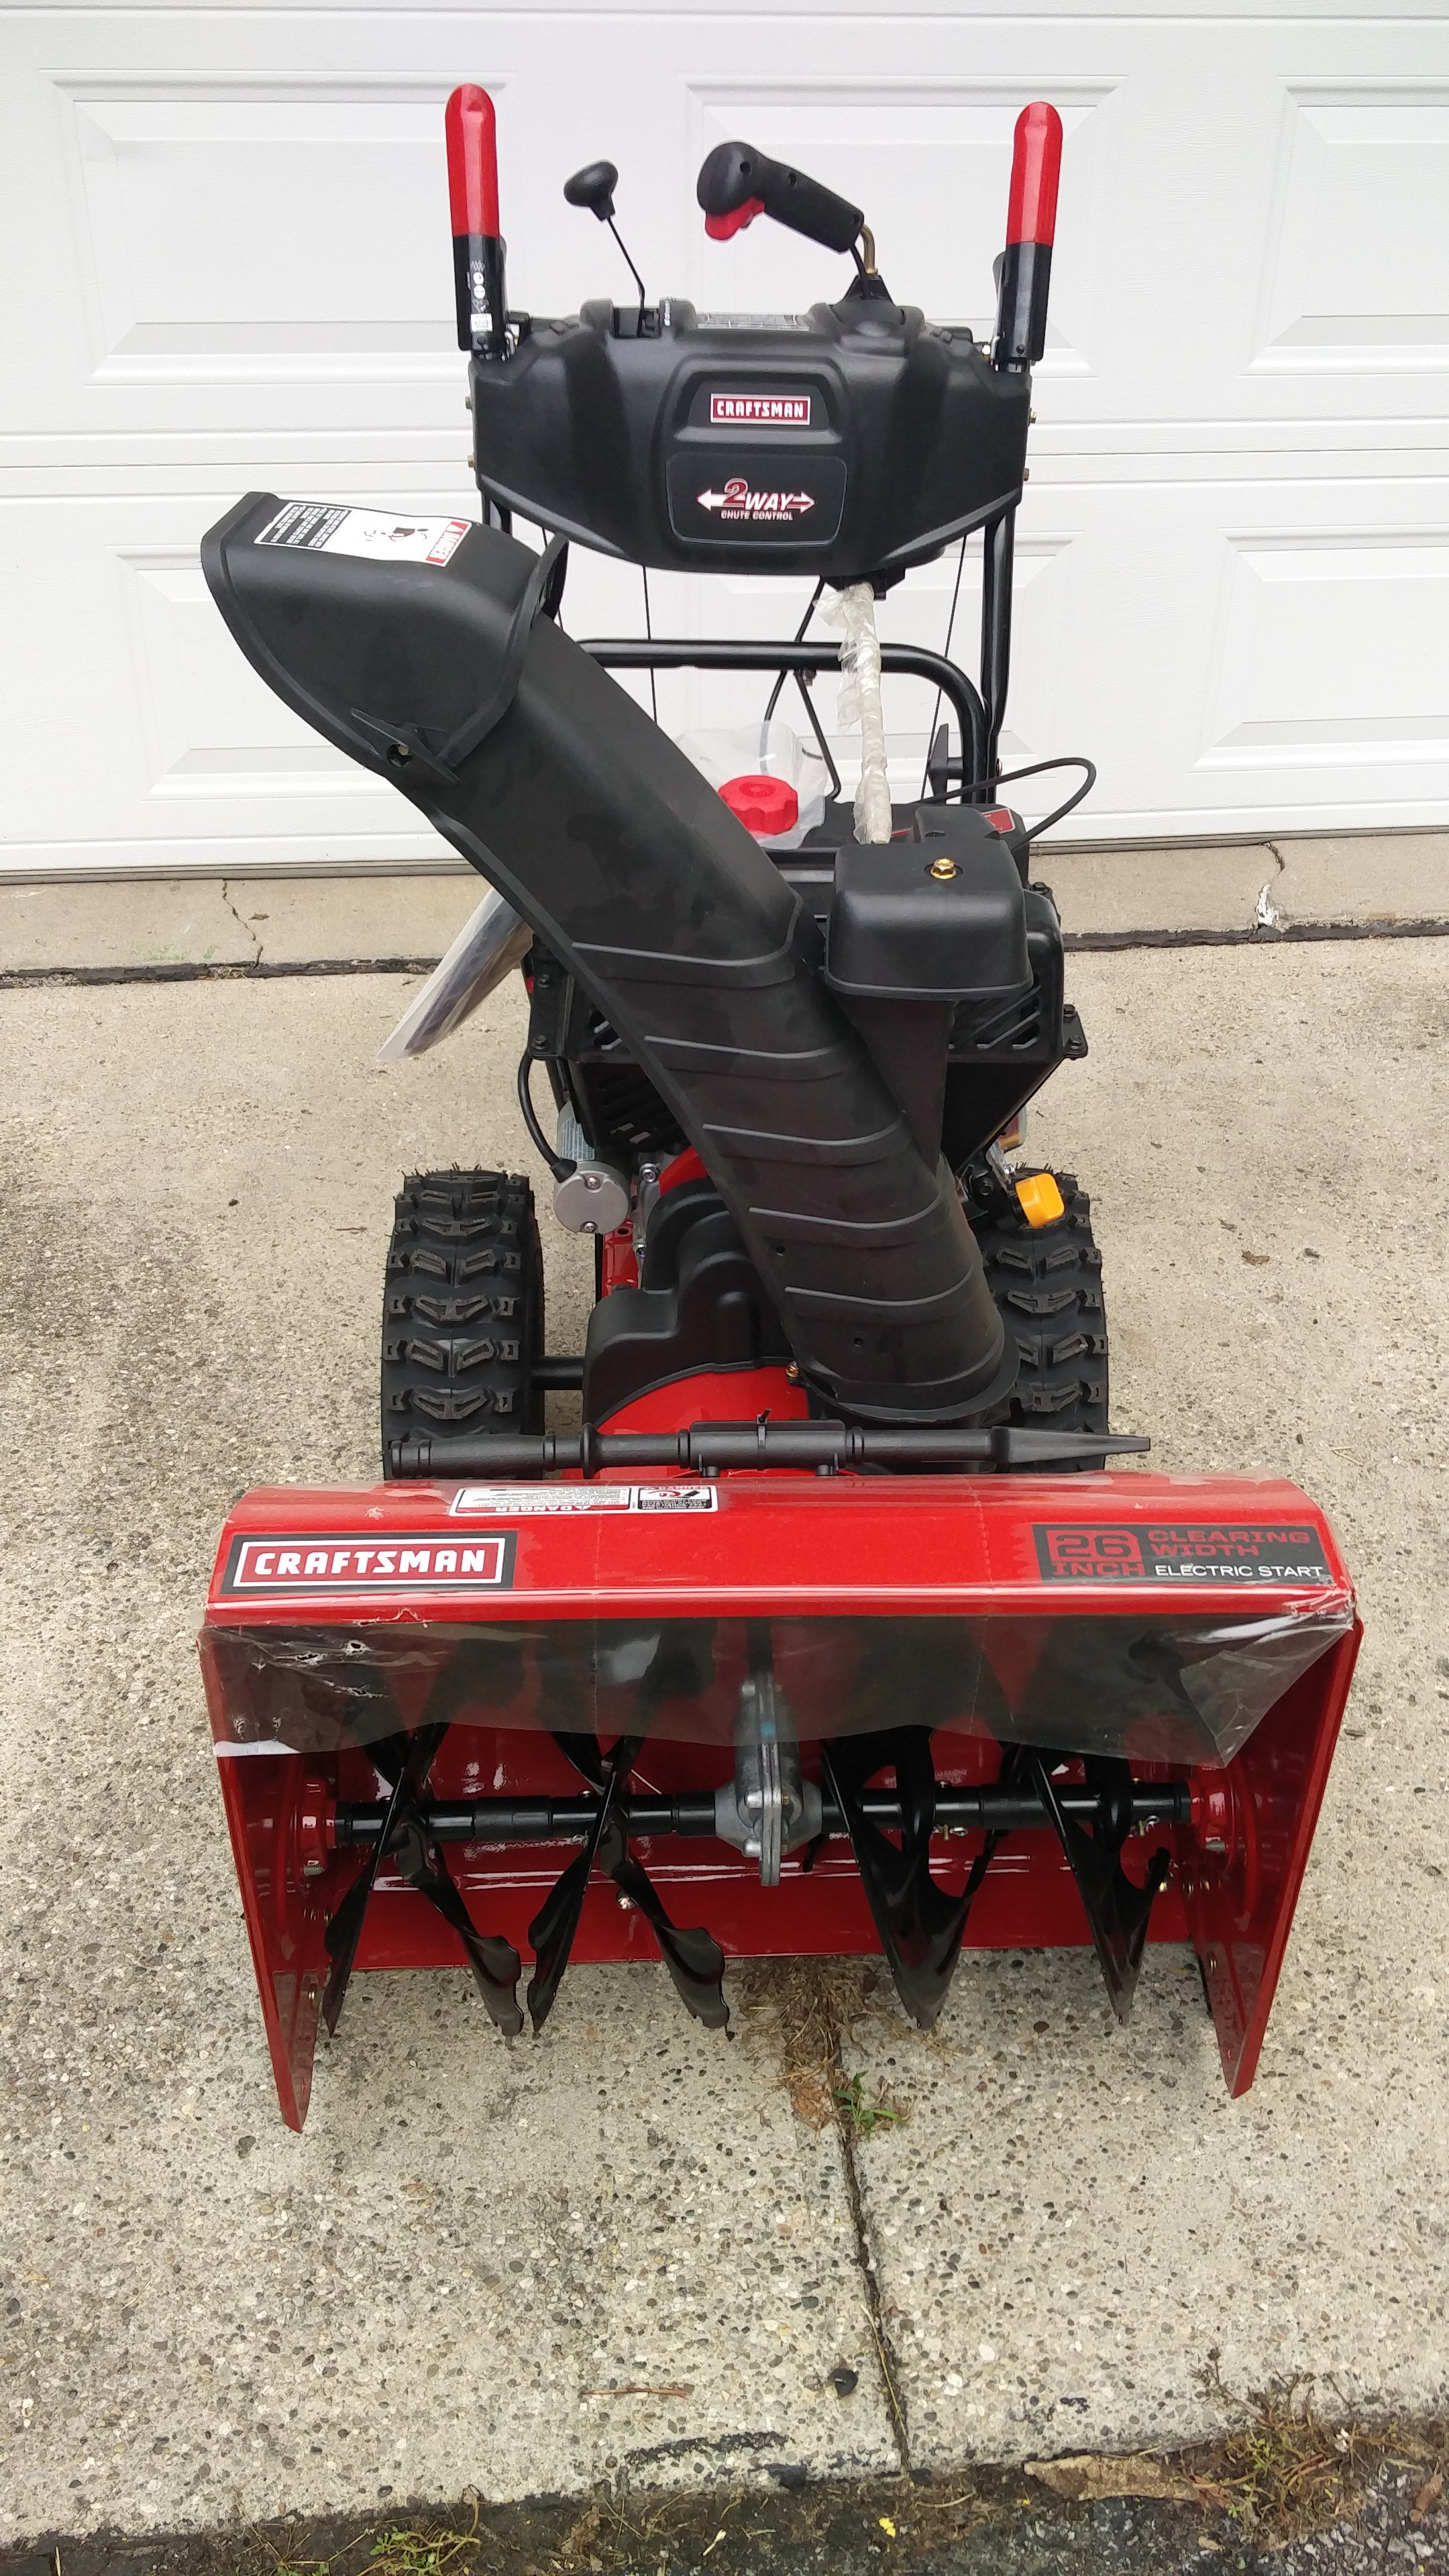 CLOSED NEW never used Craftsman 26" Model #88972 Snow blower / Snow